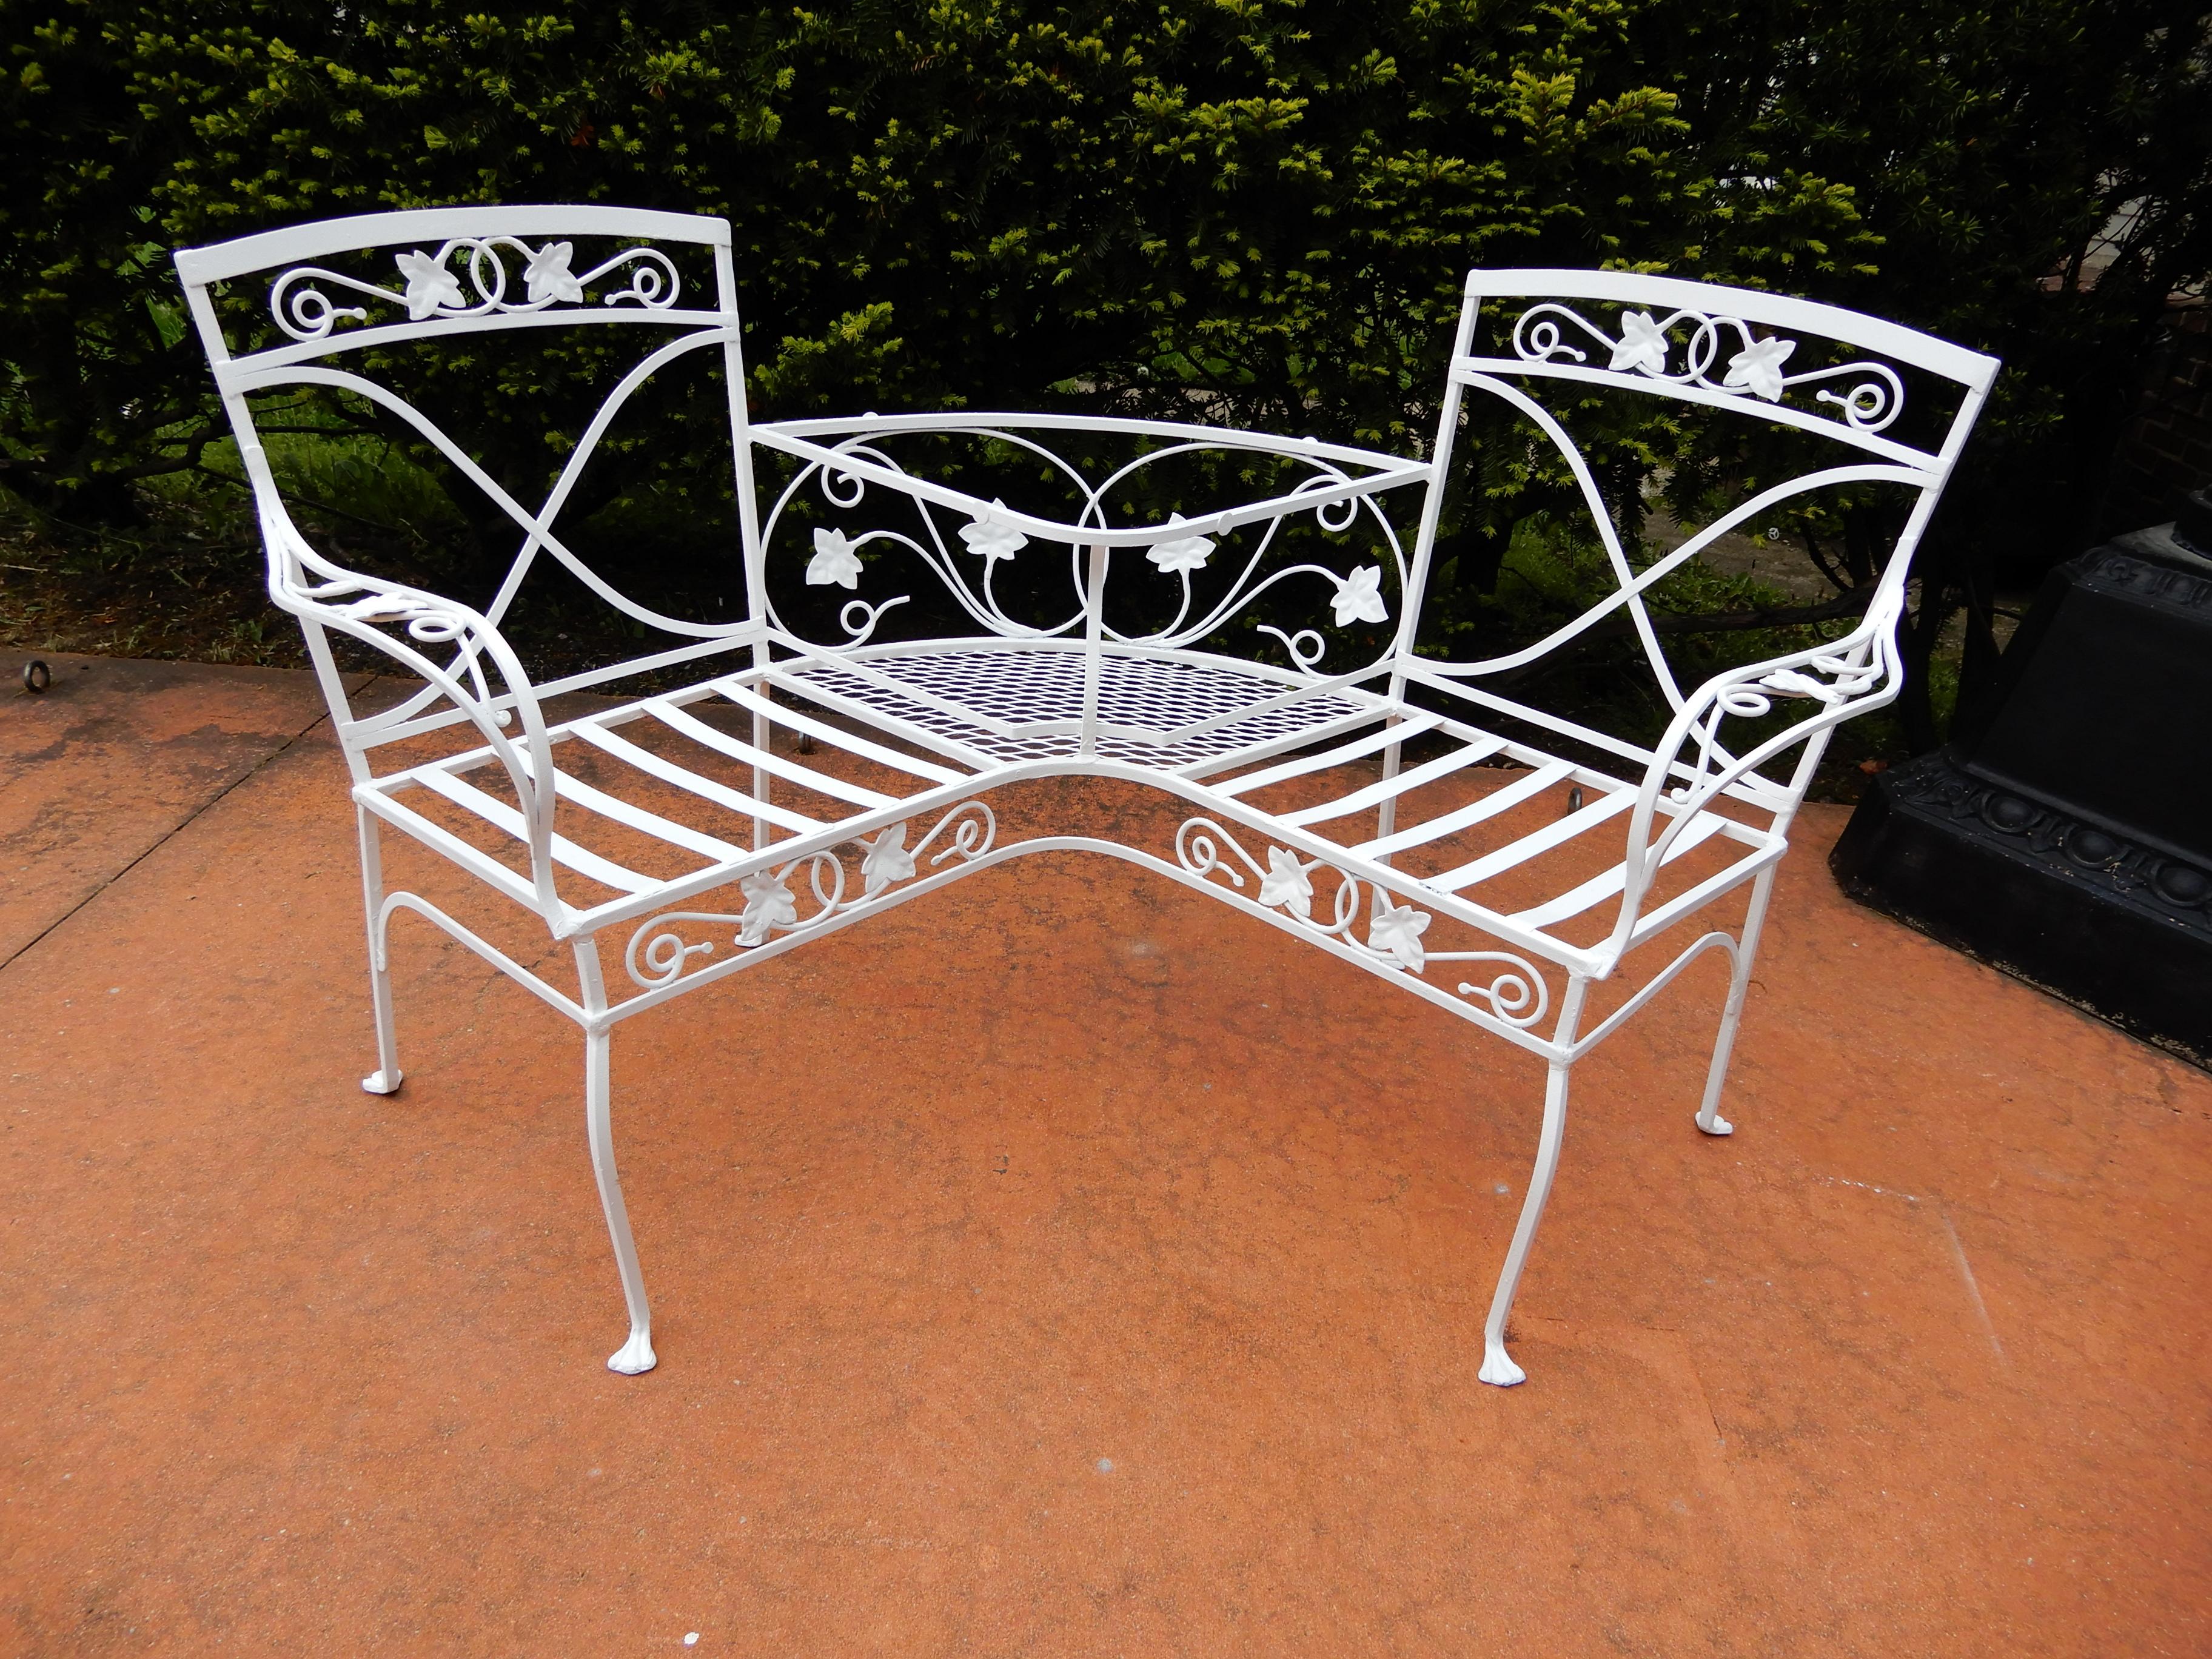 A Salterini wrought iron garden tete a tete, in the desirable Mt Vernon pattern. The piece is raised on 4 legs terminating in the paw foot. The two chairs are joined in the Center and a new glass should be placed in between the seats. The bench has